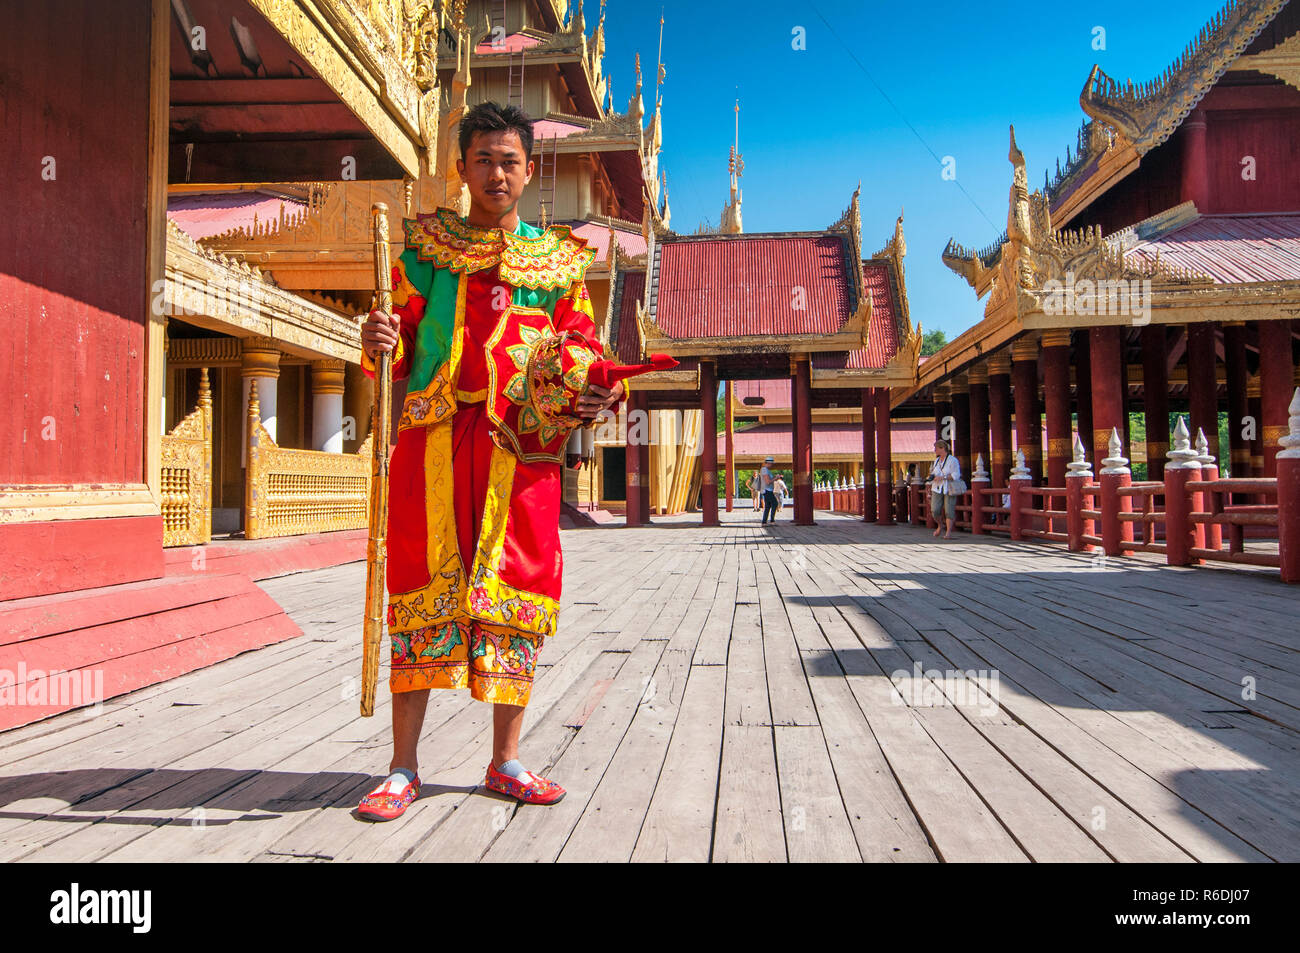 The Mandalay Palace, Located In Mandalay, Myanmar, Is The Last Royal Palace Of The Last Burmese Monarchy Stock Photo